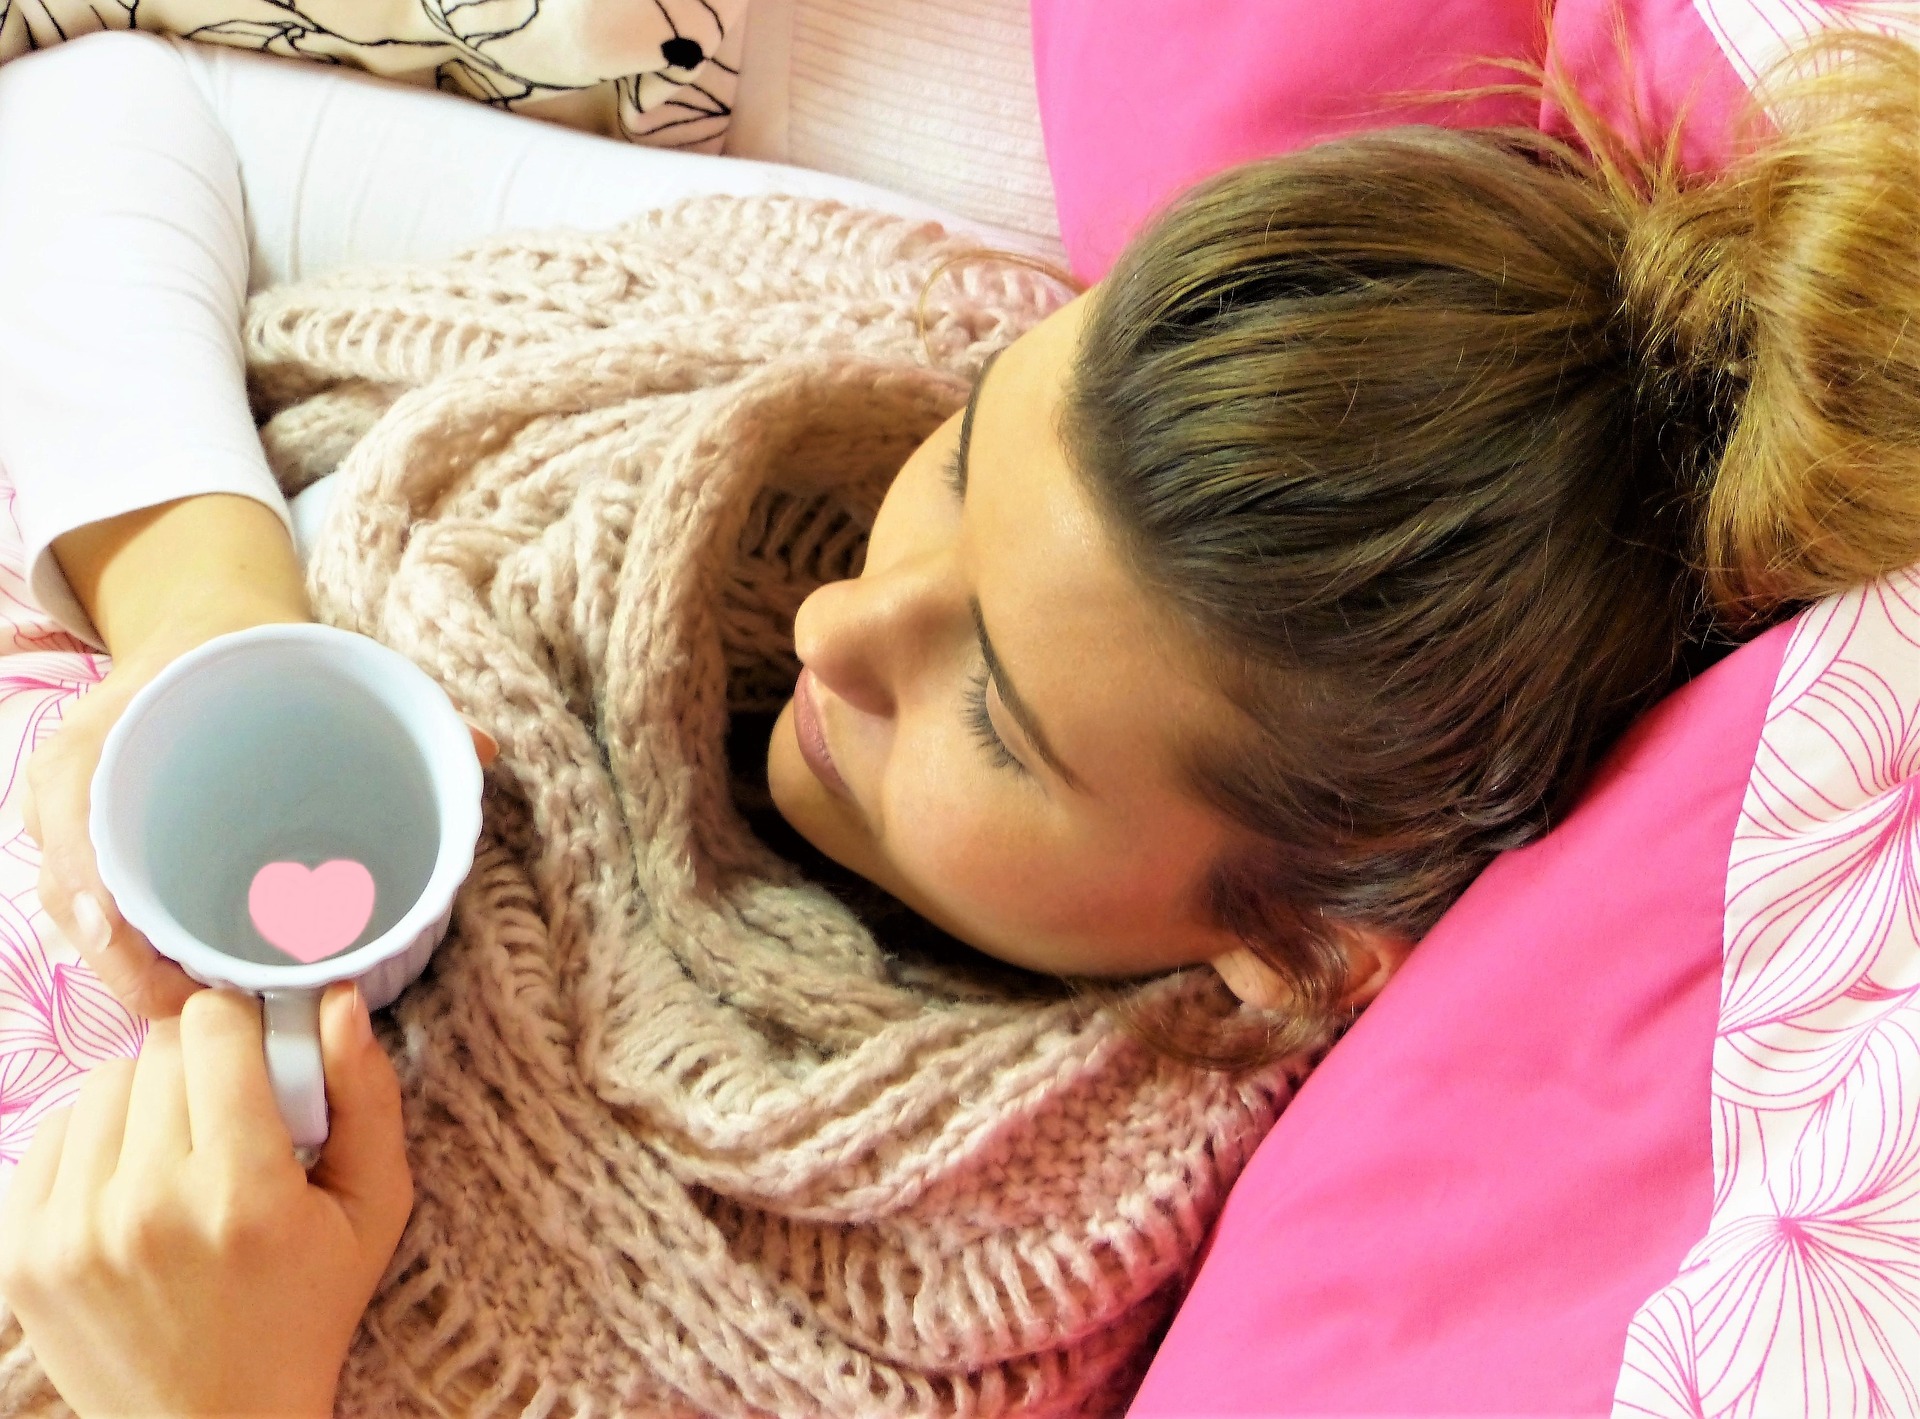 young woman in bed wrapped in warm blanket holding a cup of warm liquid, possibly ill or sick